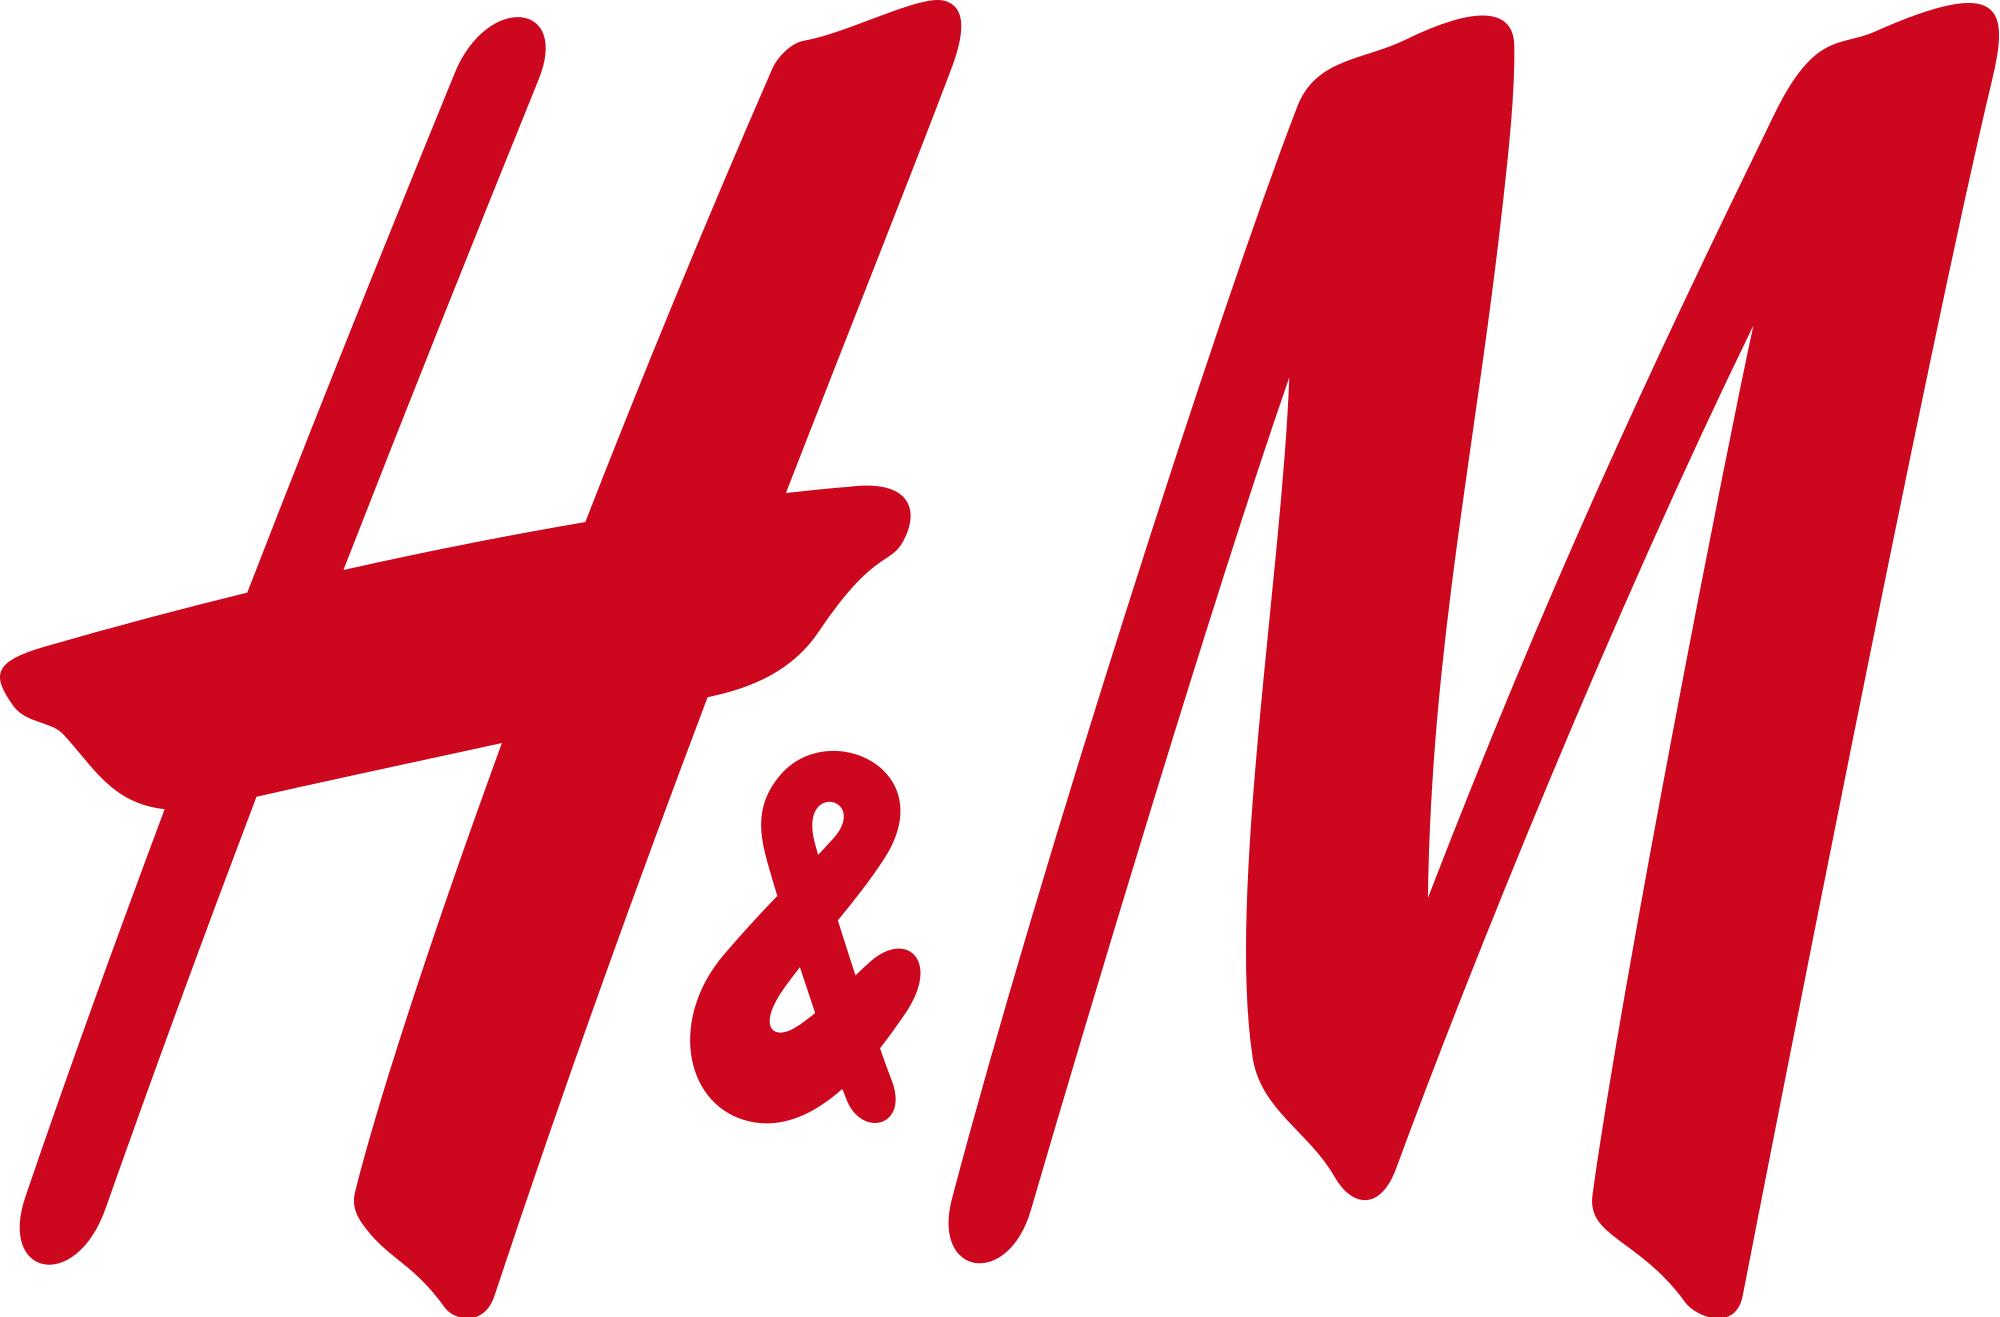 Logo of Piquee's client Hm